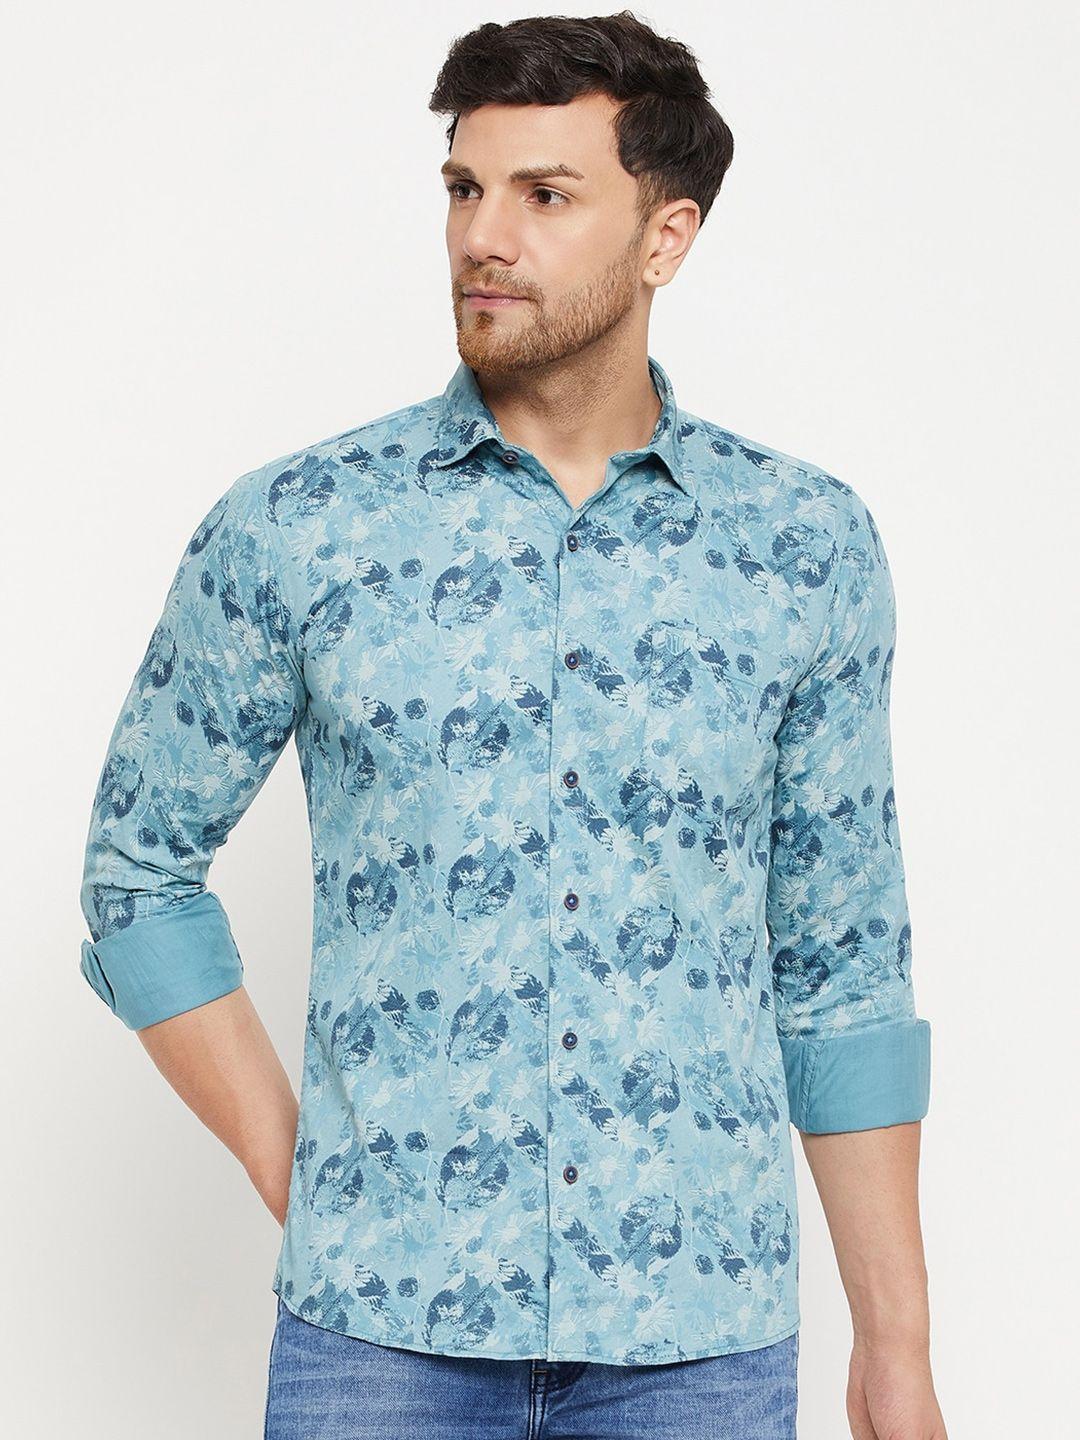 duke slim fit abstract printed casual pure cotton shirt